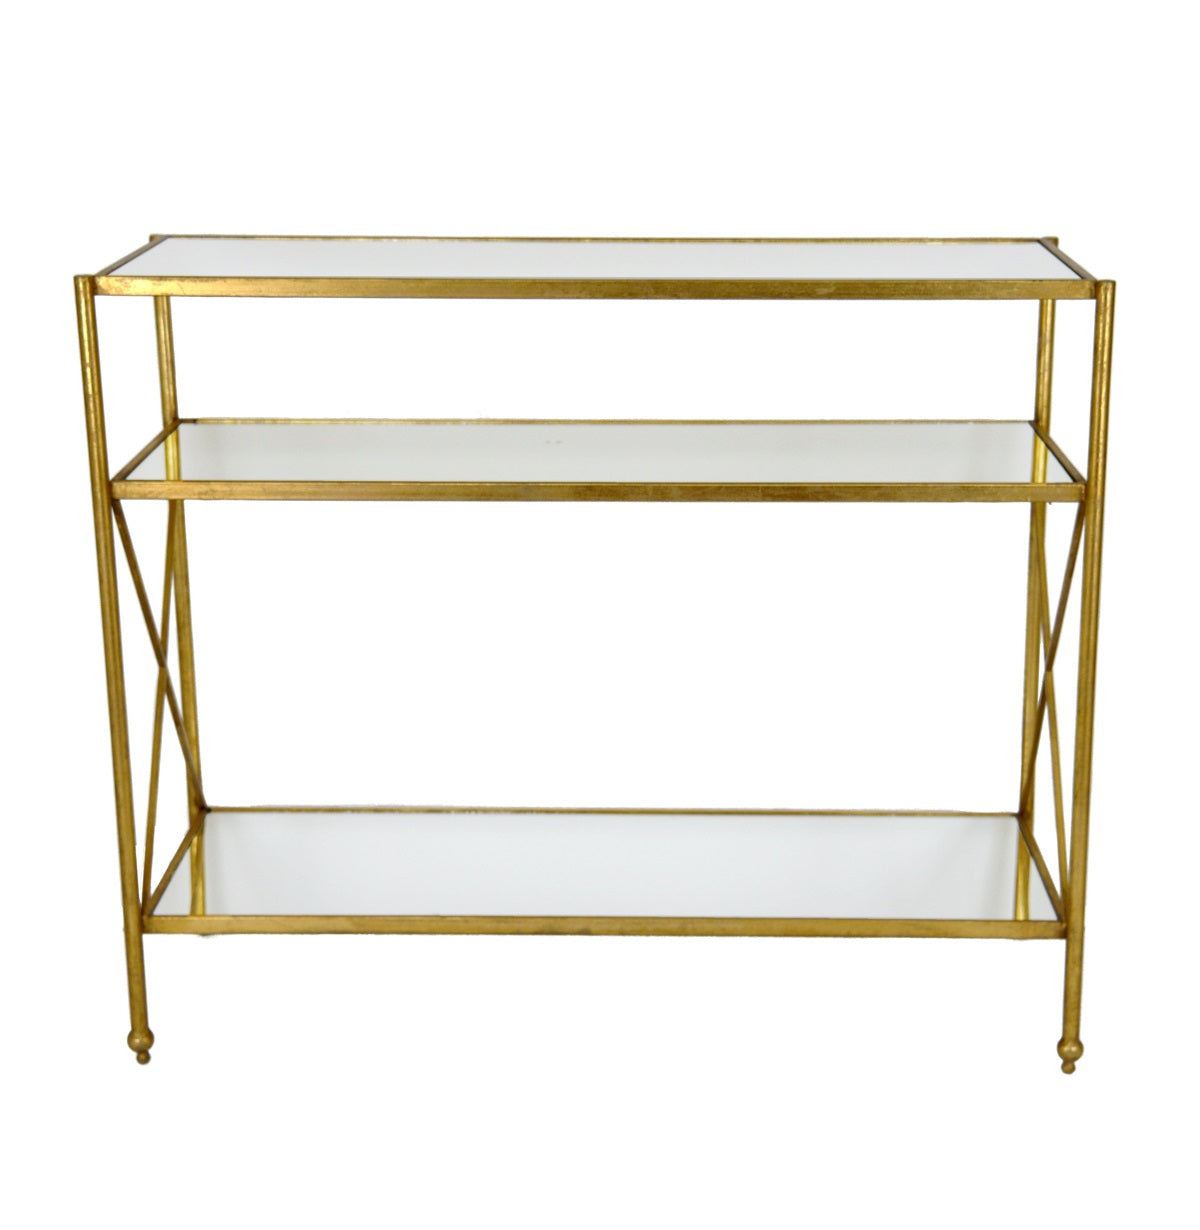 Alan Gold Console Table with 3 Shelves - Lillian Home 